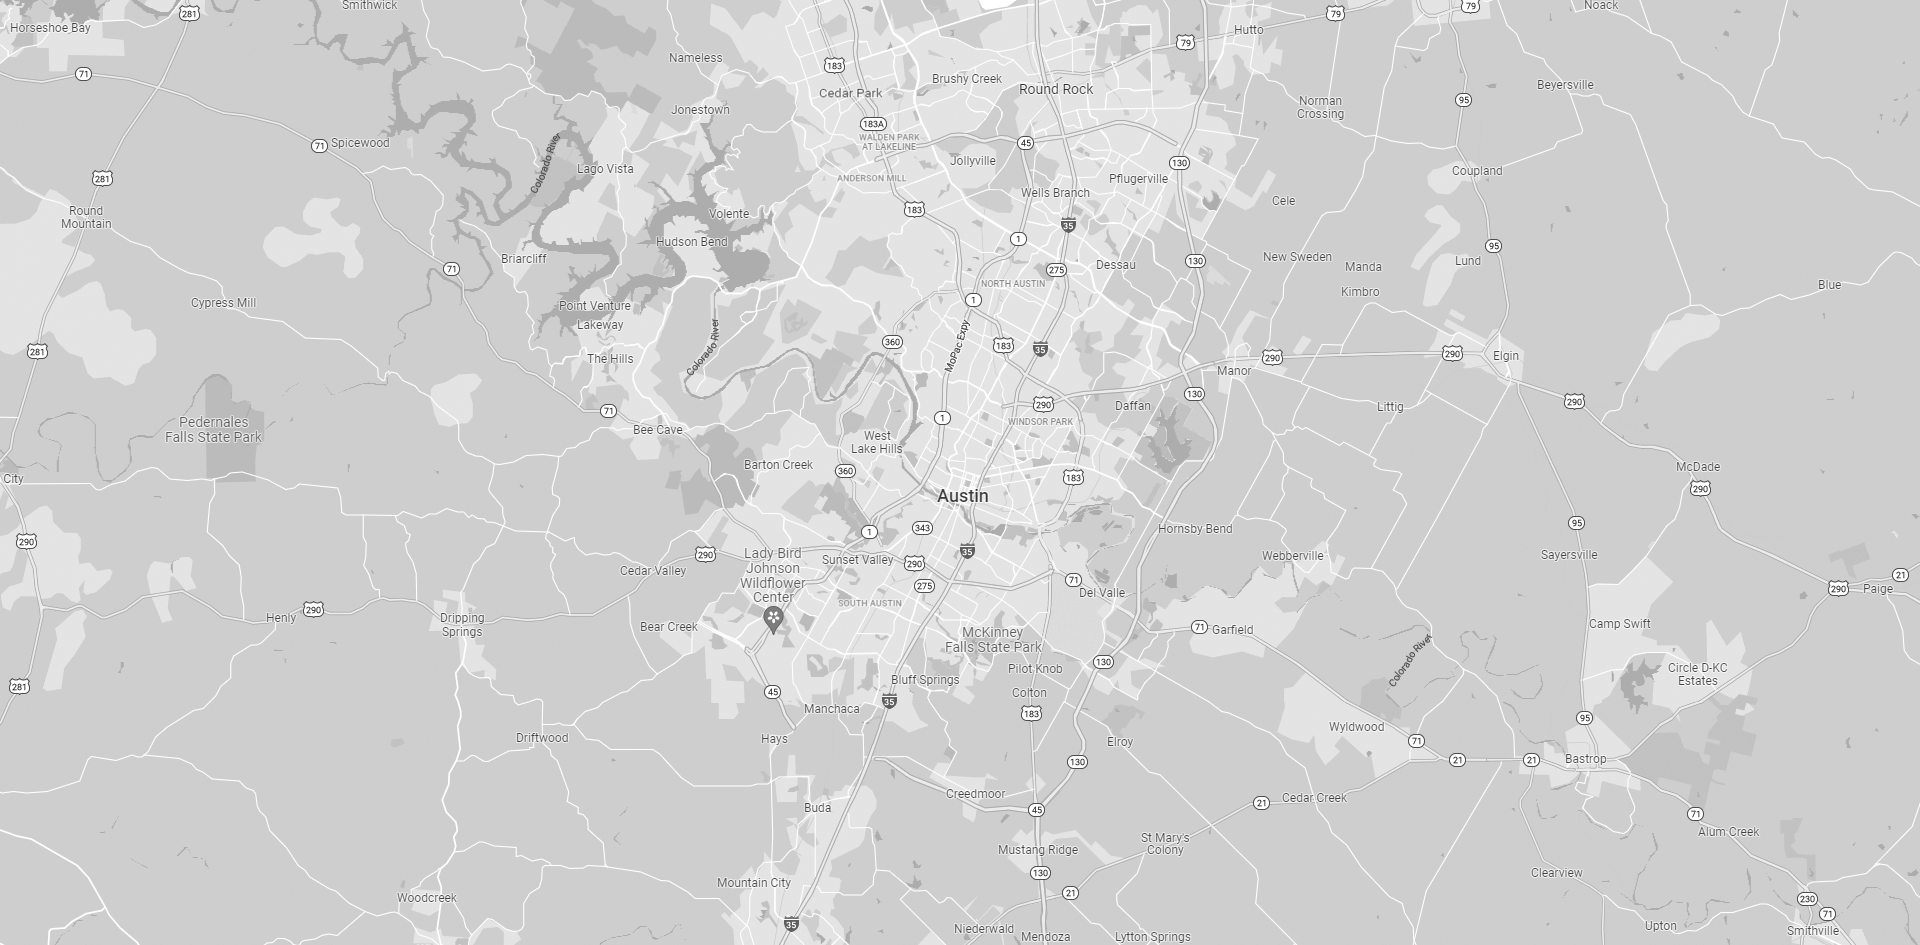 Austin, TX area map in black and white.